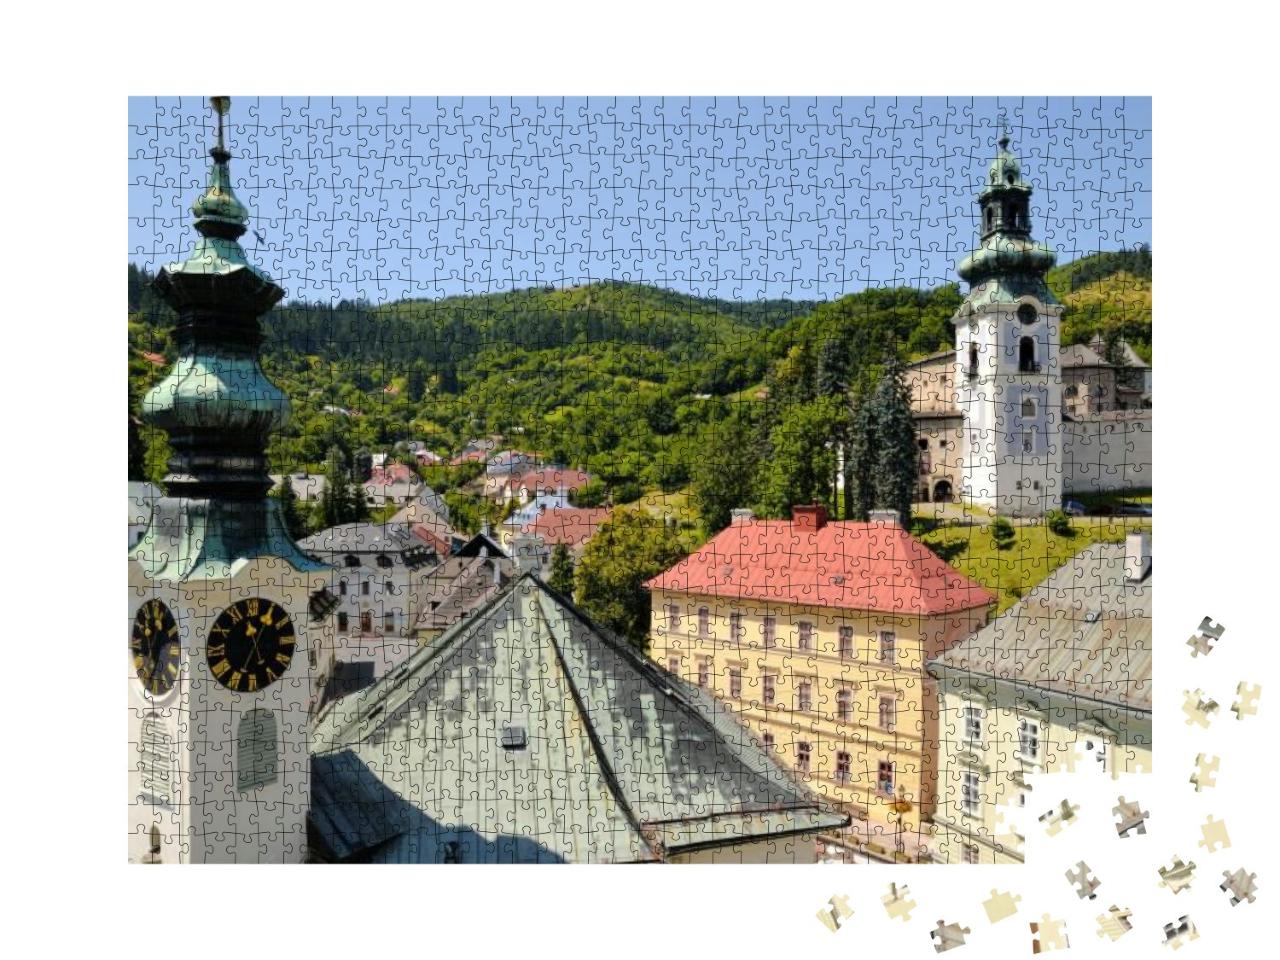 Banska Stiavnica City Hall & Behind the Old Castle... Jigsaw Puzzle with 1000 pieces